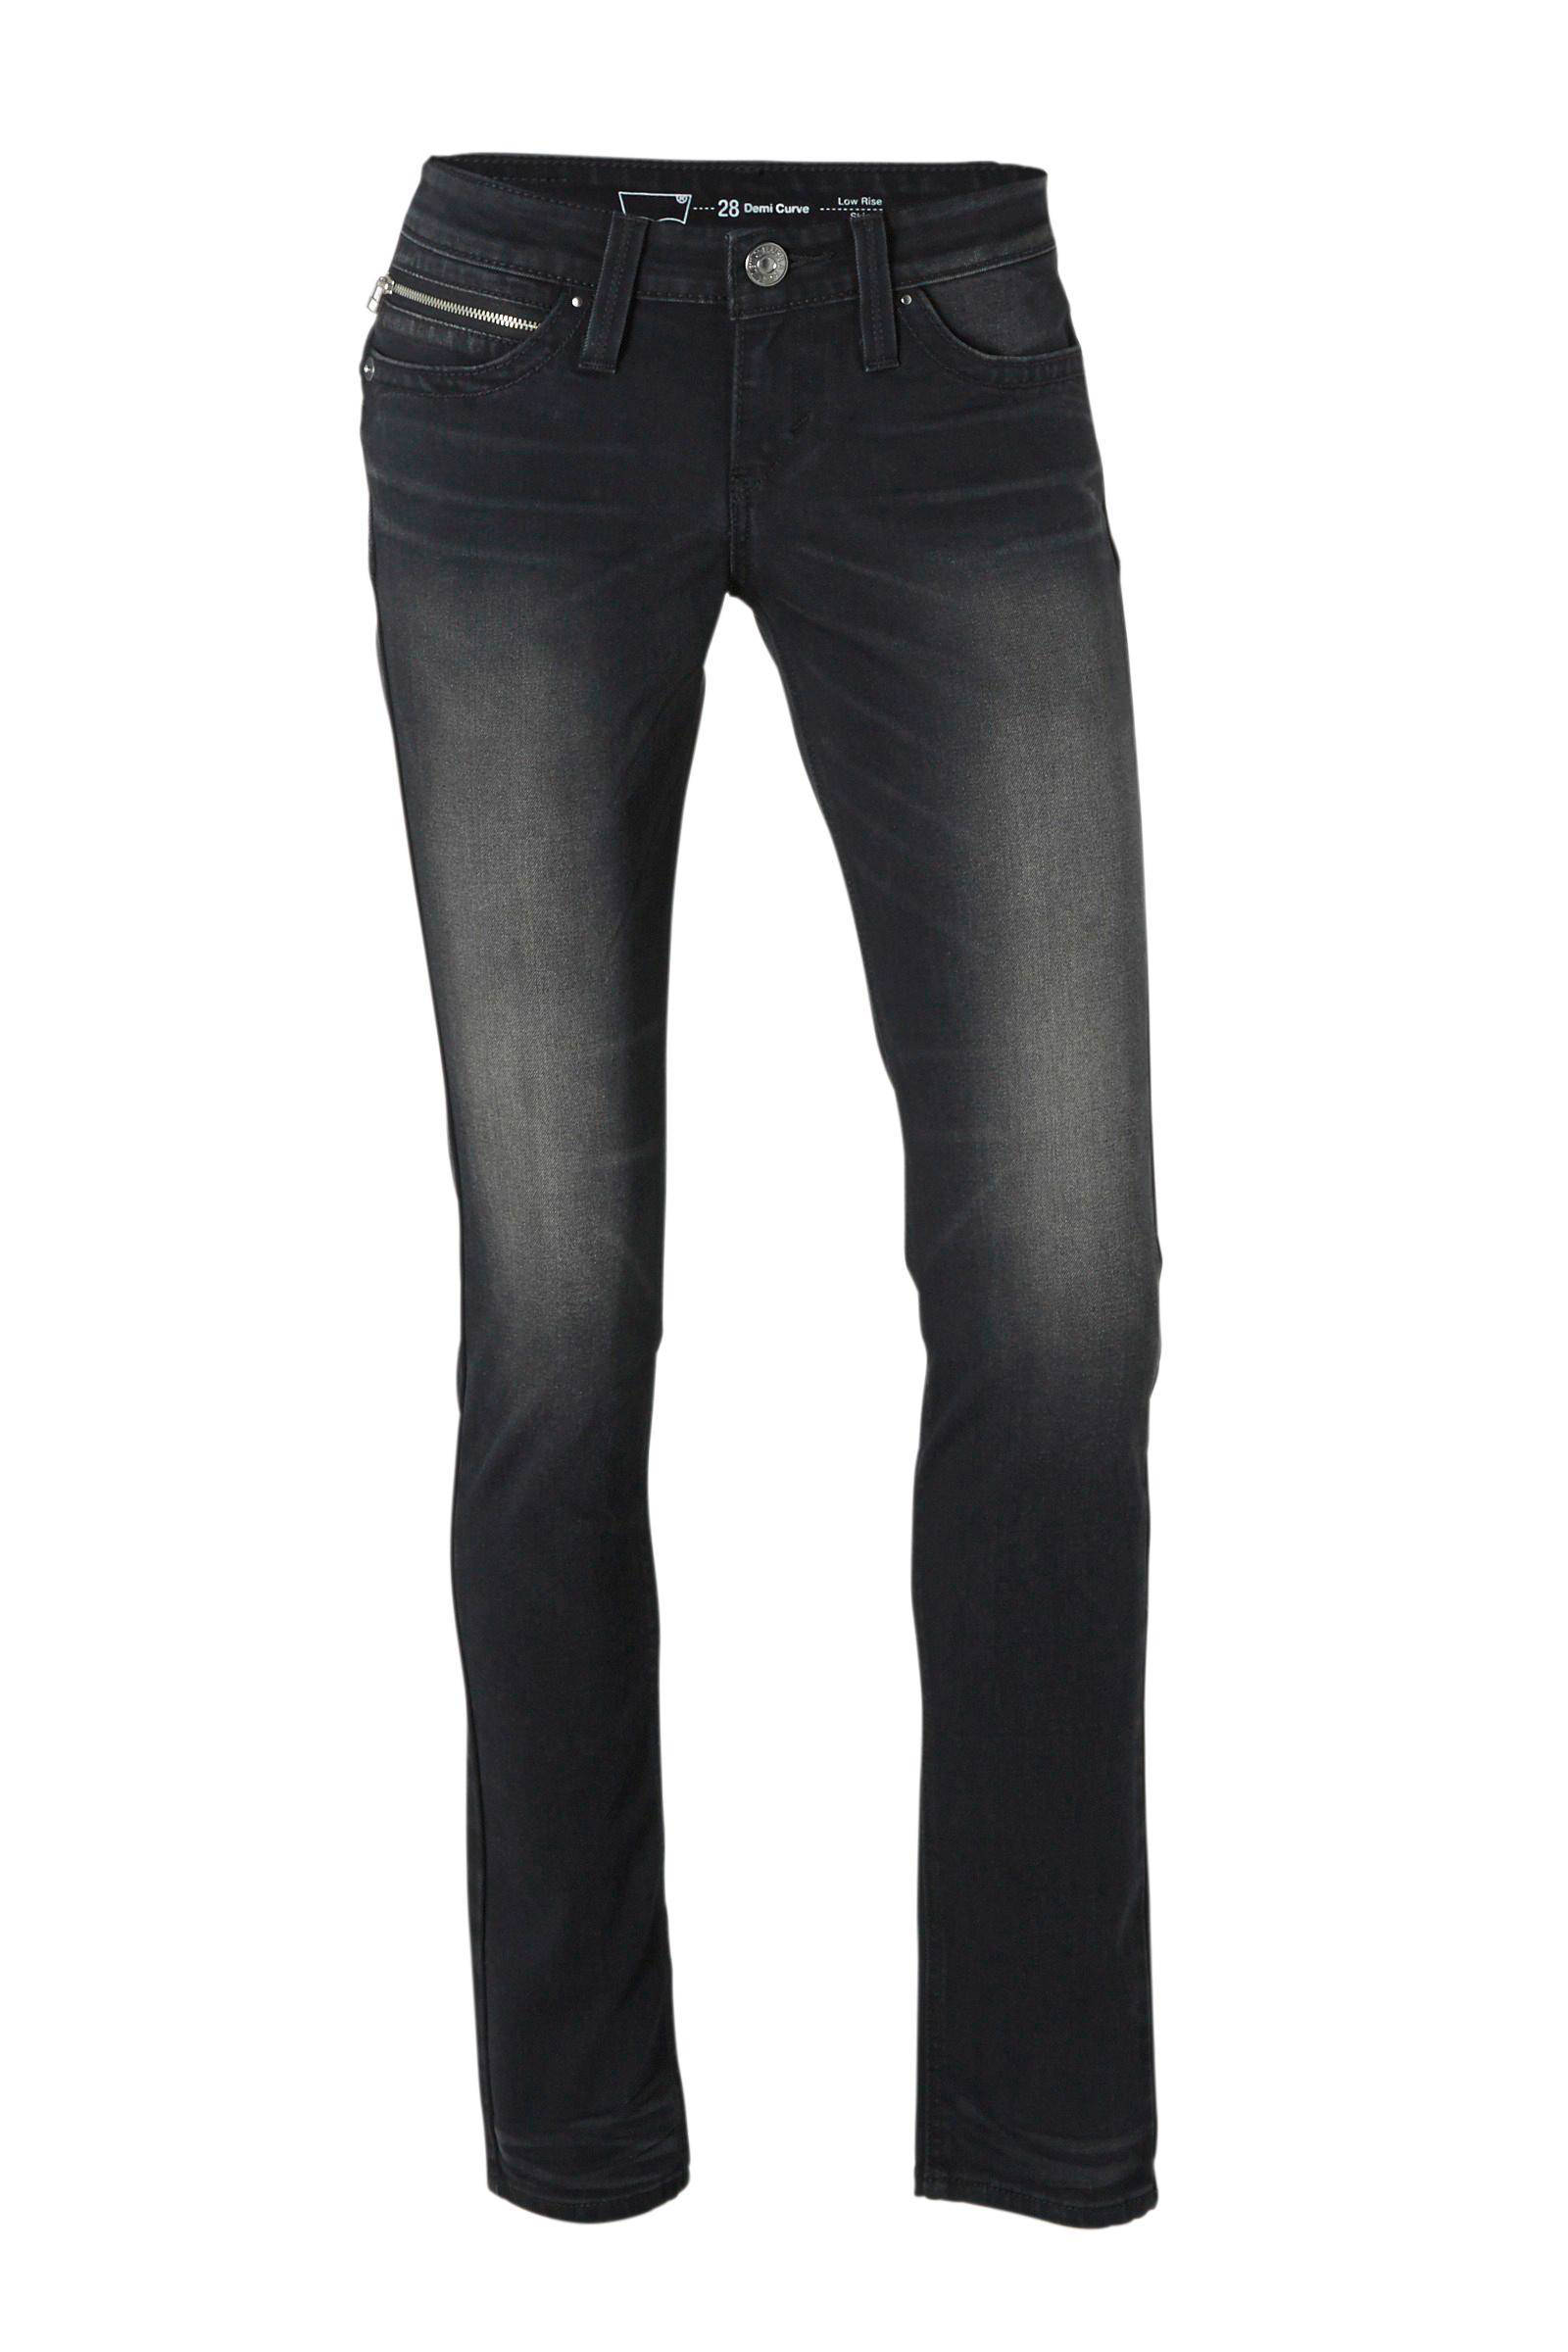 levis low rise skinny